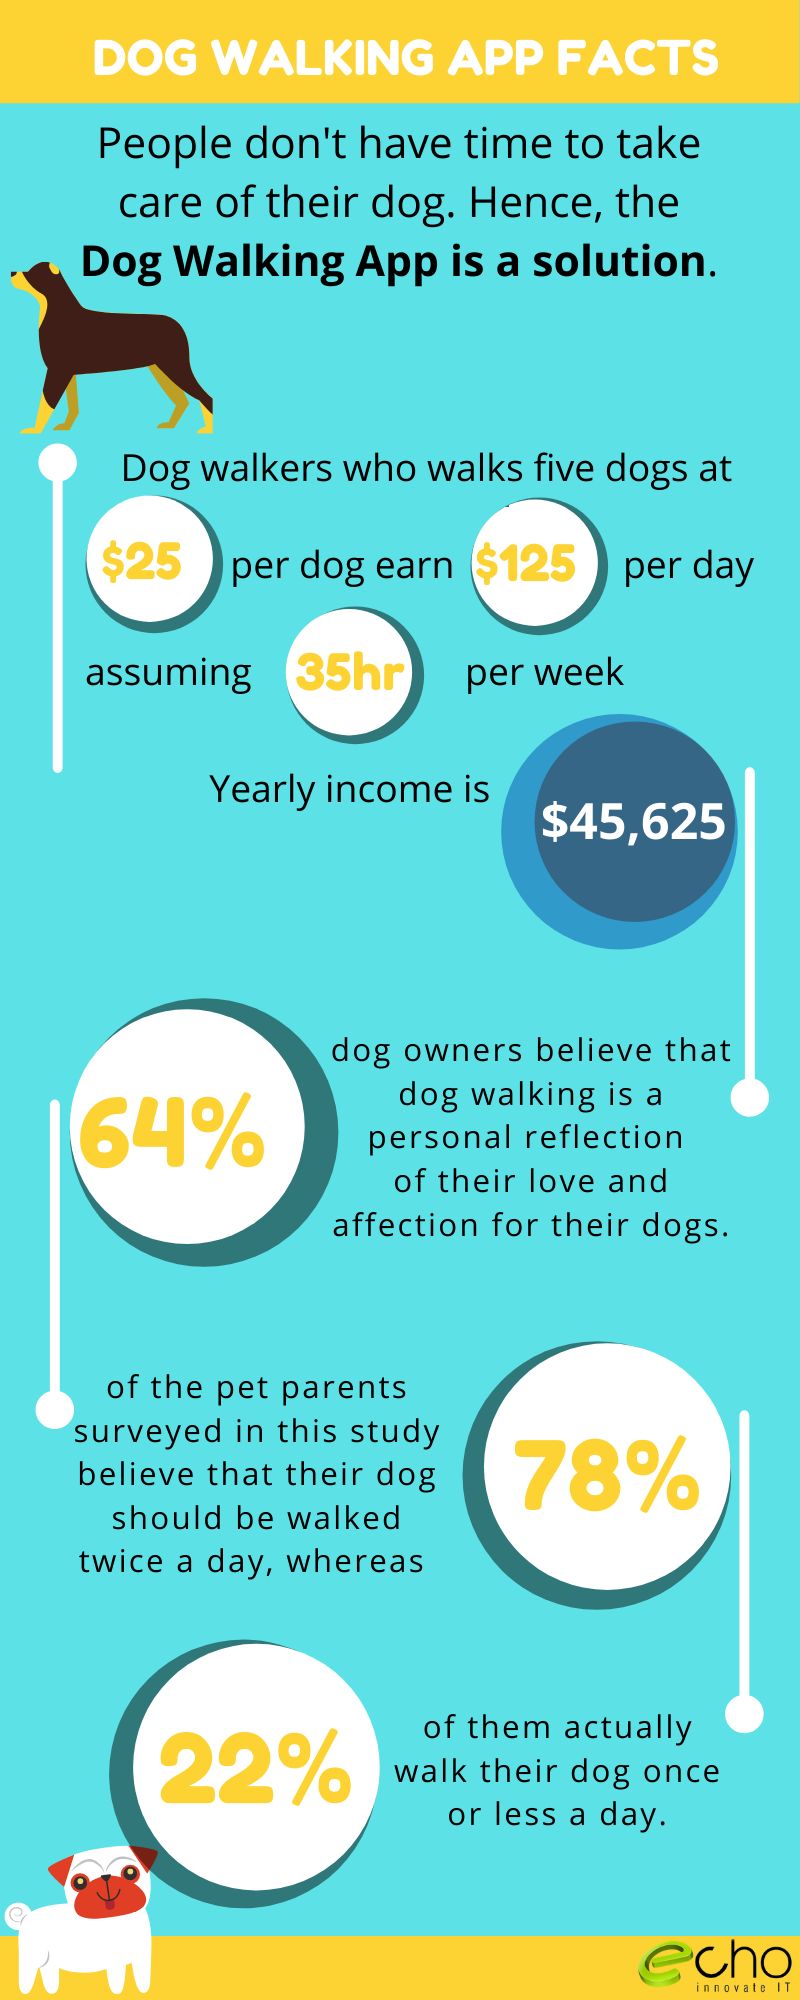 Dog Walking App Facts and stats